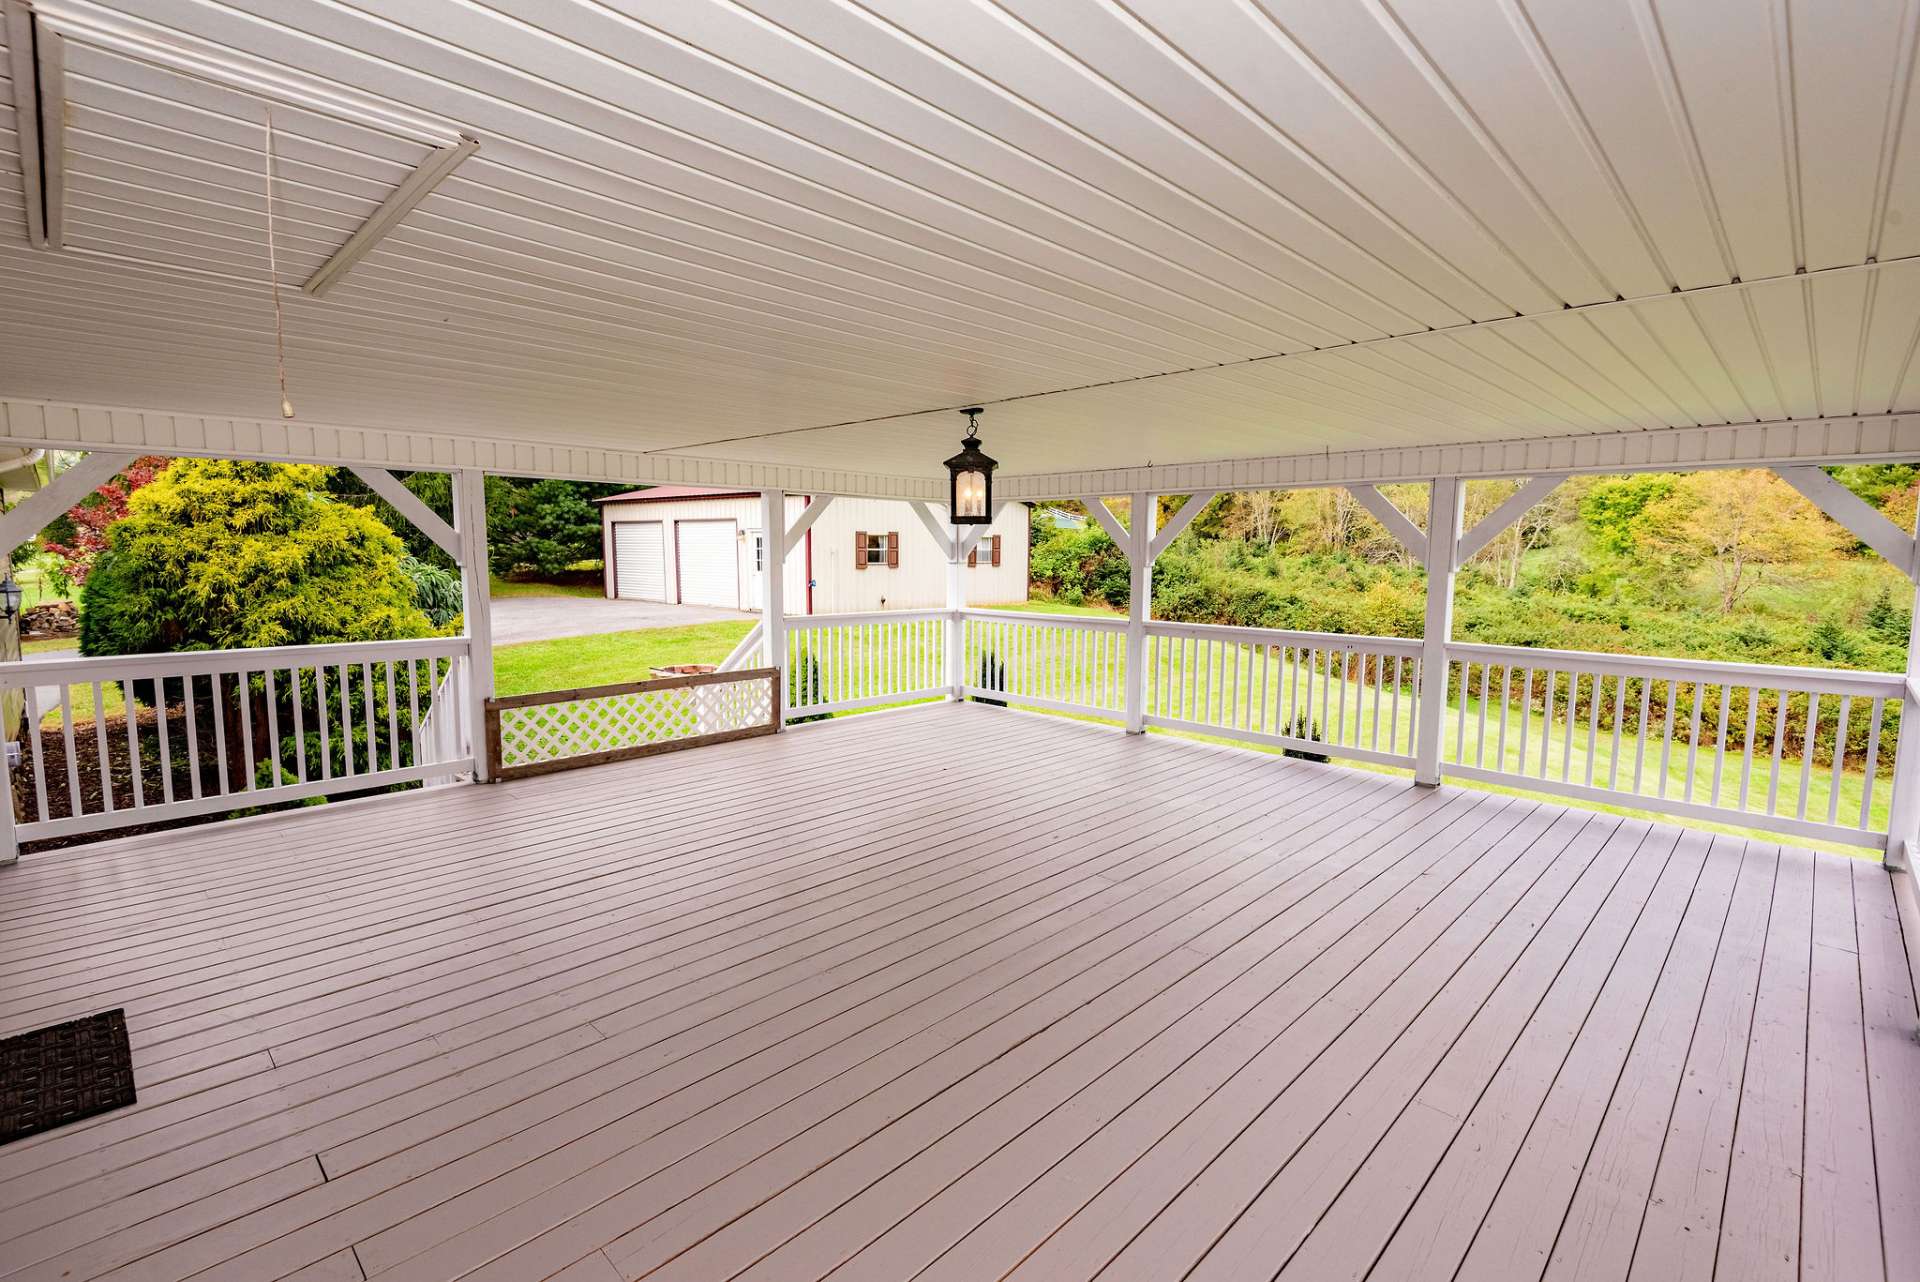 This large porch is perfect for entertaining or a toddler riding their tricycle.